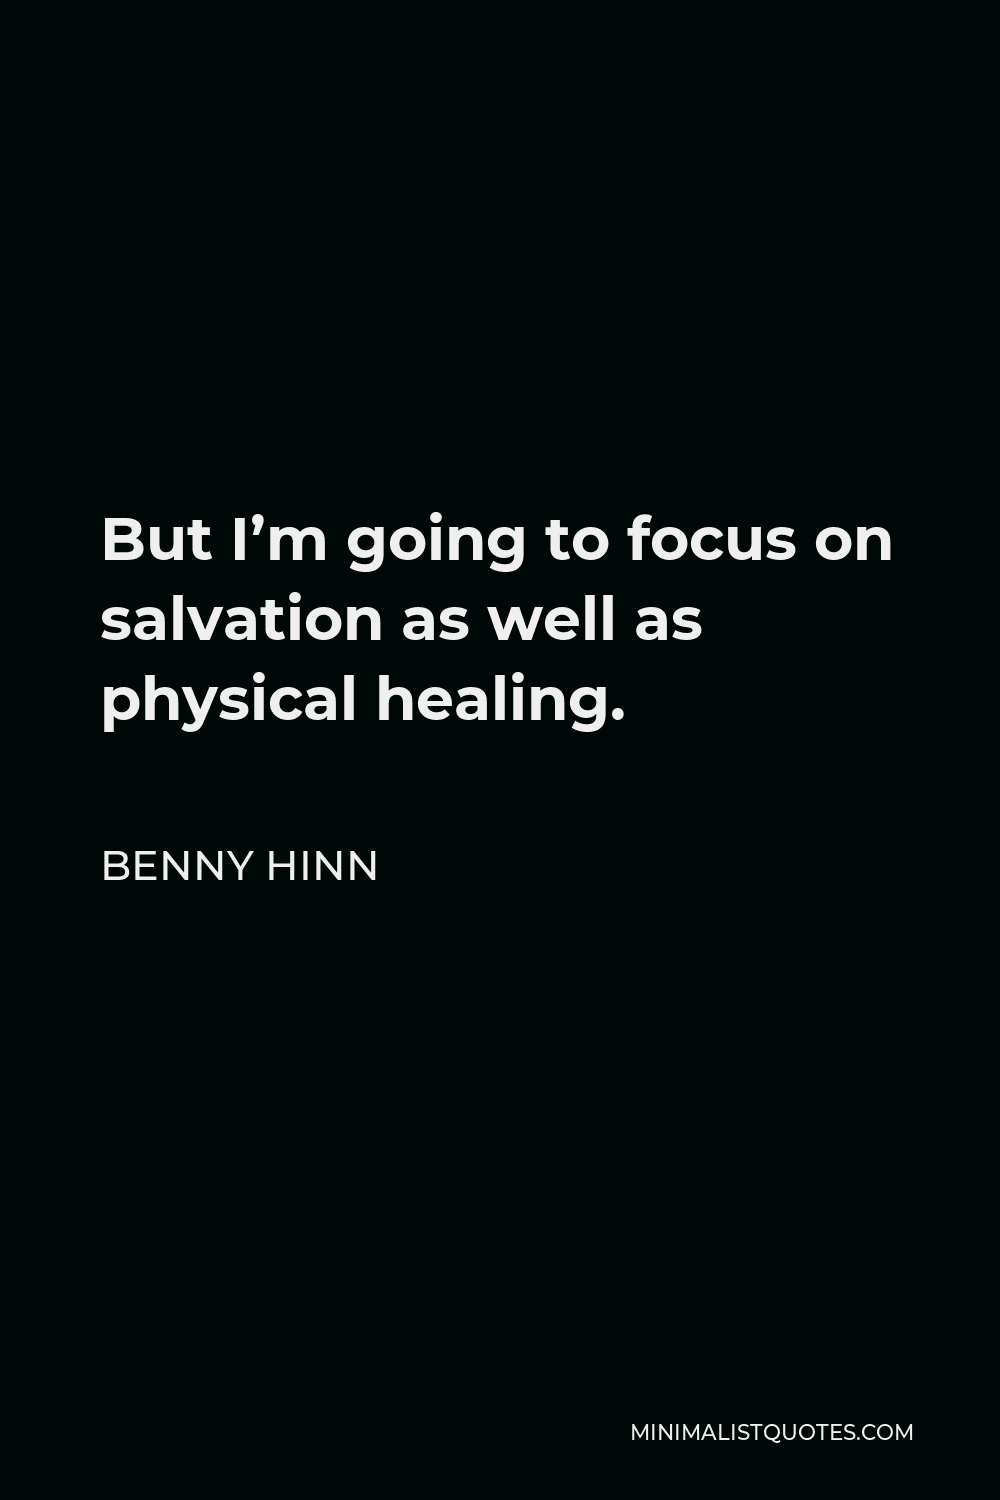 Benny Hinn Quote - But I’m going to focus on salvation as well as physical healing.